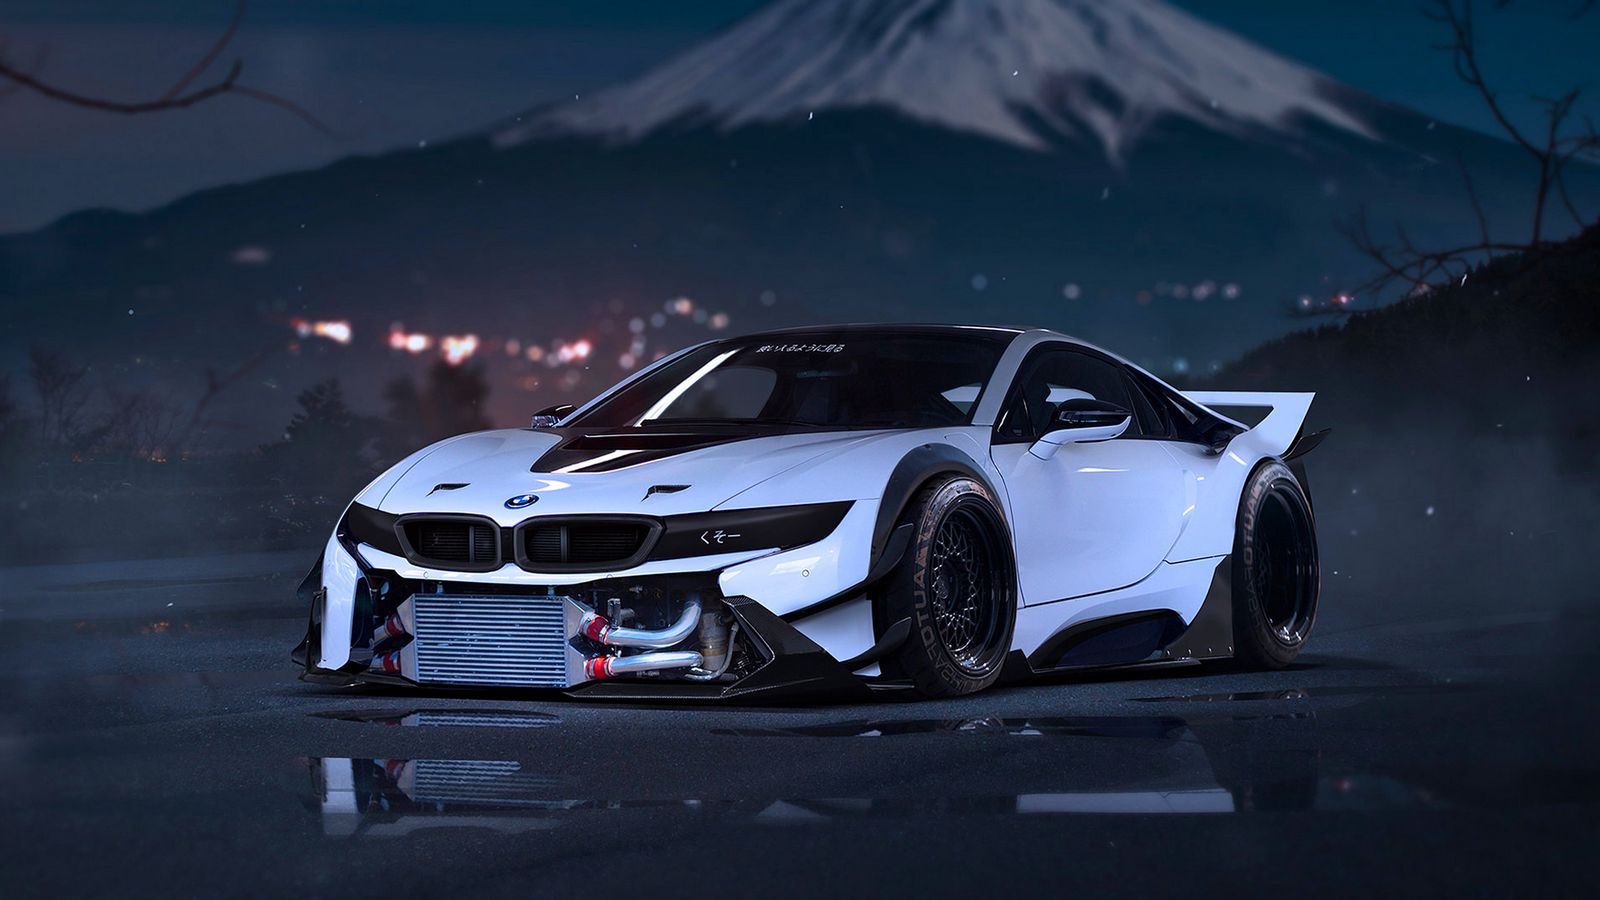 Download wallpaper 1600x900 bmw, i8, tuning, sport car, front view  widescreen 16:9 hd background